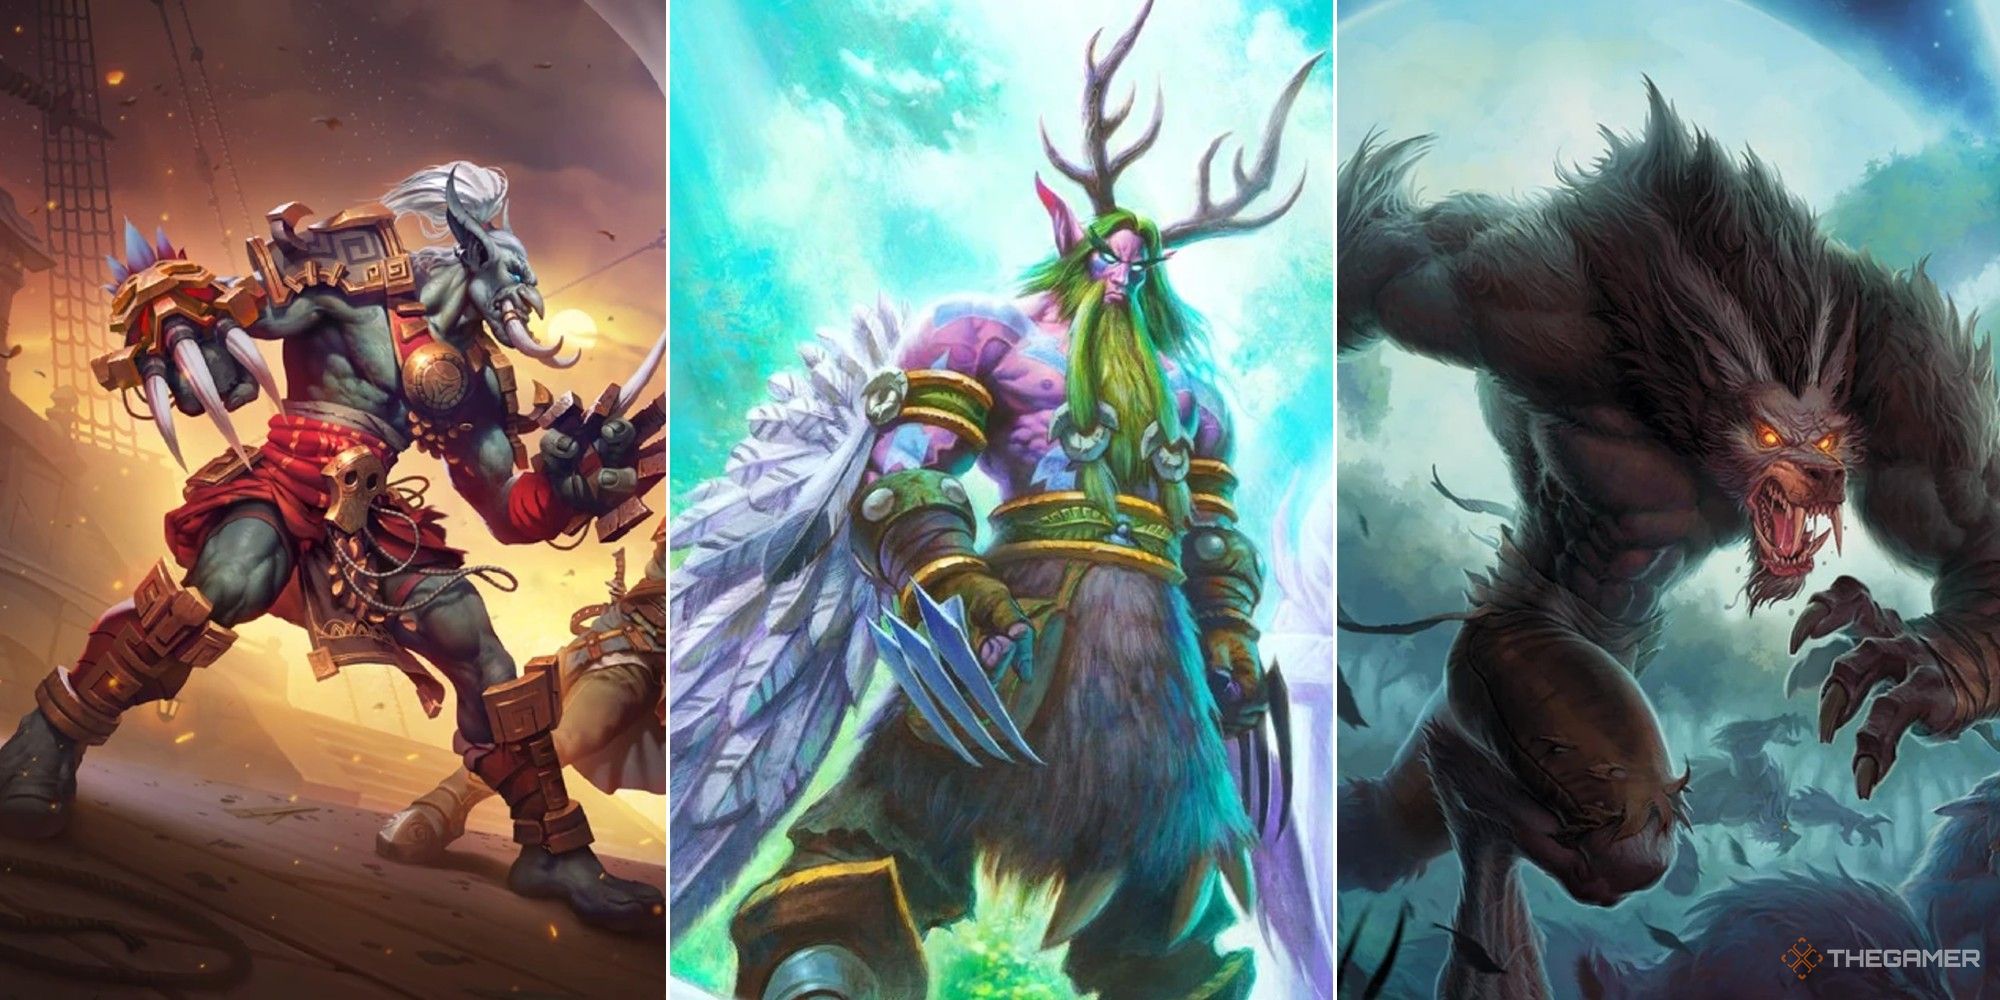 World of Warcraft collage showing a Zandalari Troll, Malfurion the Night Elf, and a Worgen pack.